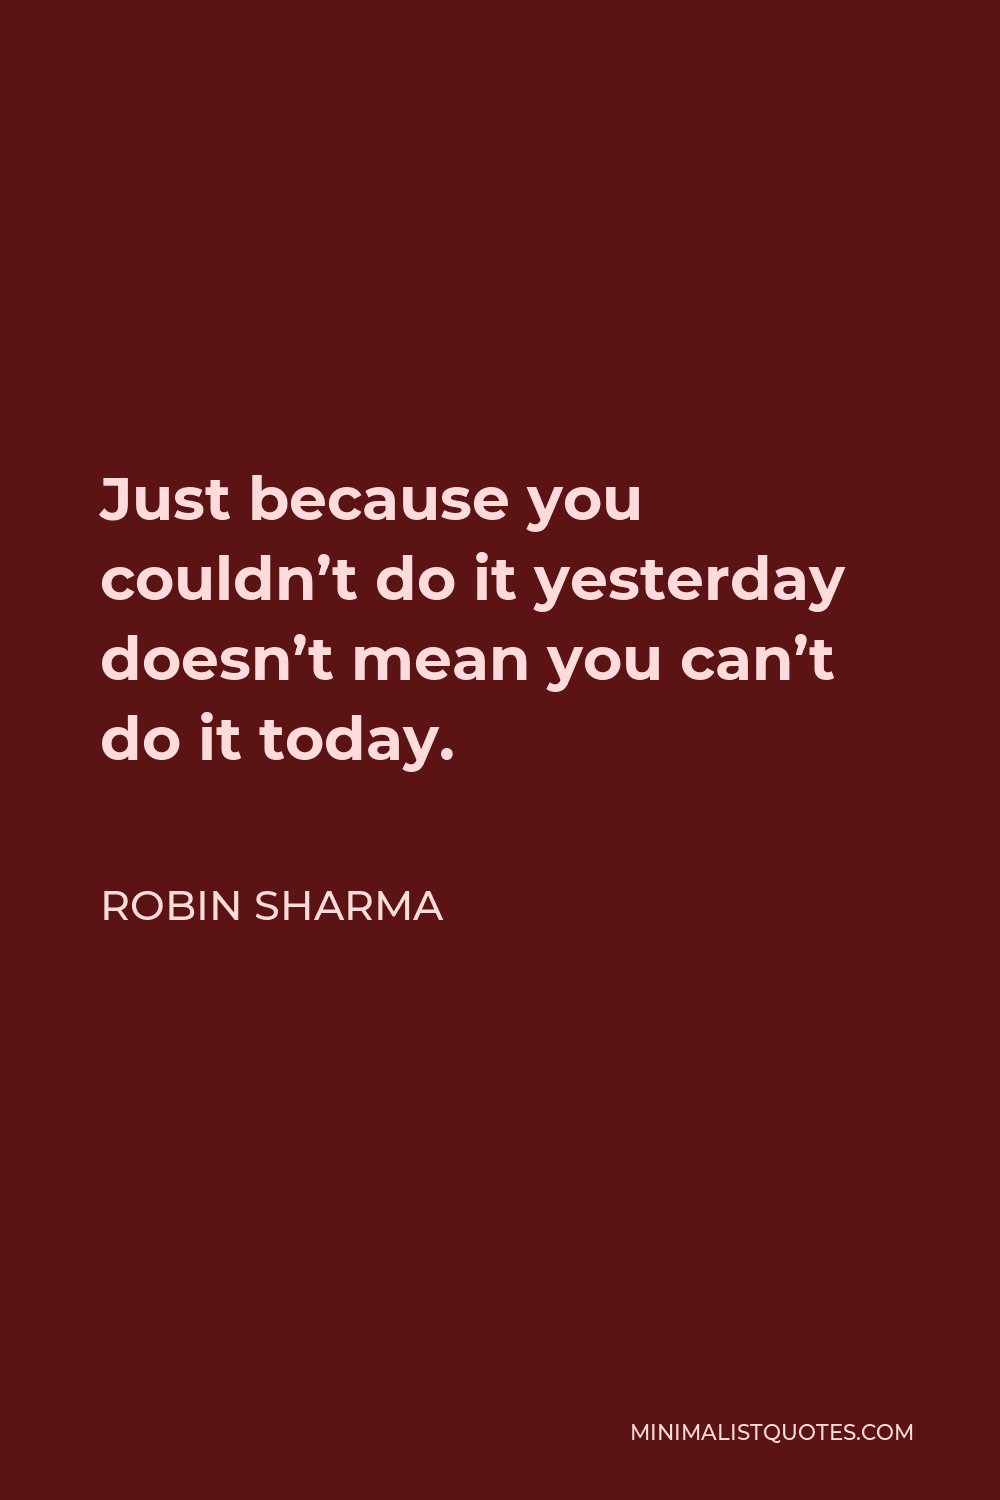 Robin Sharma Quote - Just because you couldn’t do it yesterday doesn’t mean you can’t do it today.